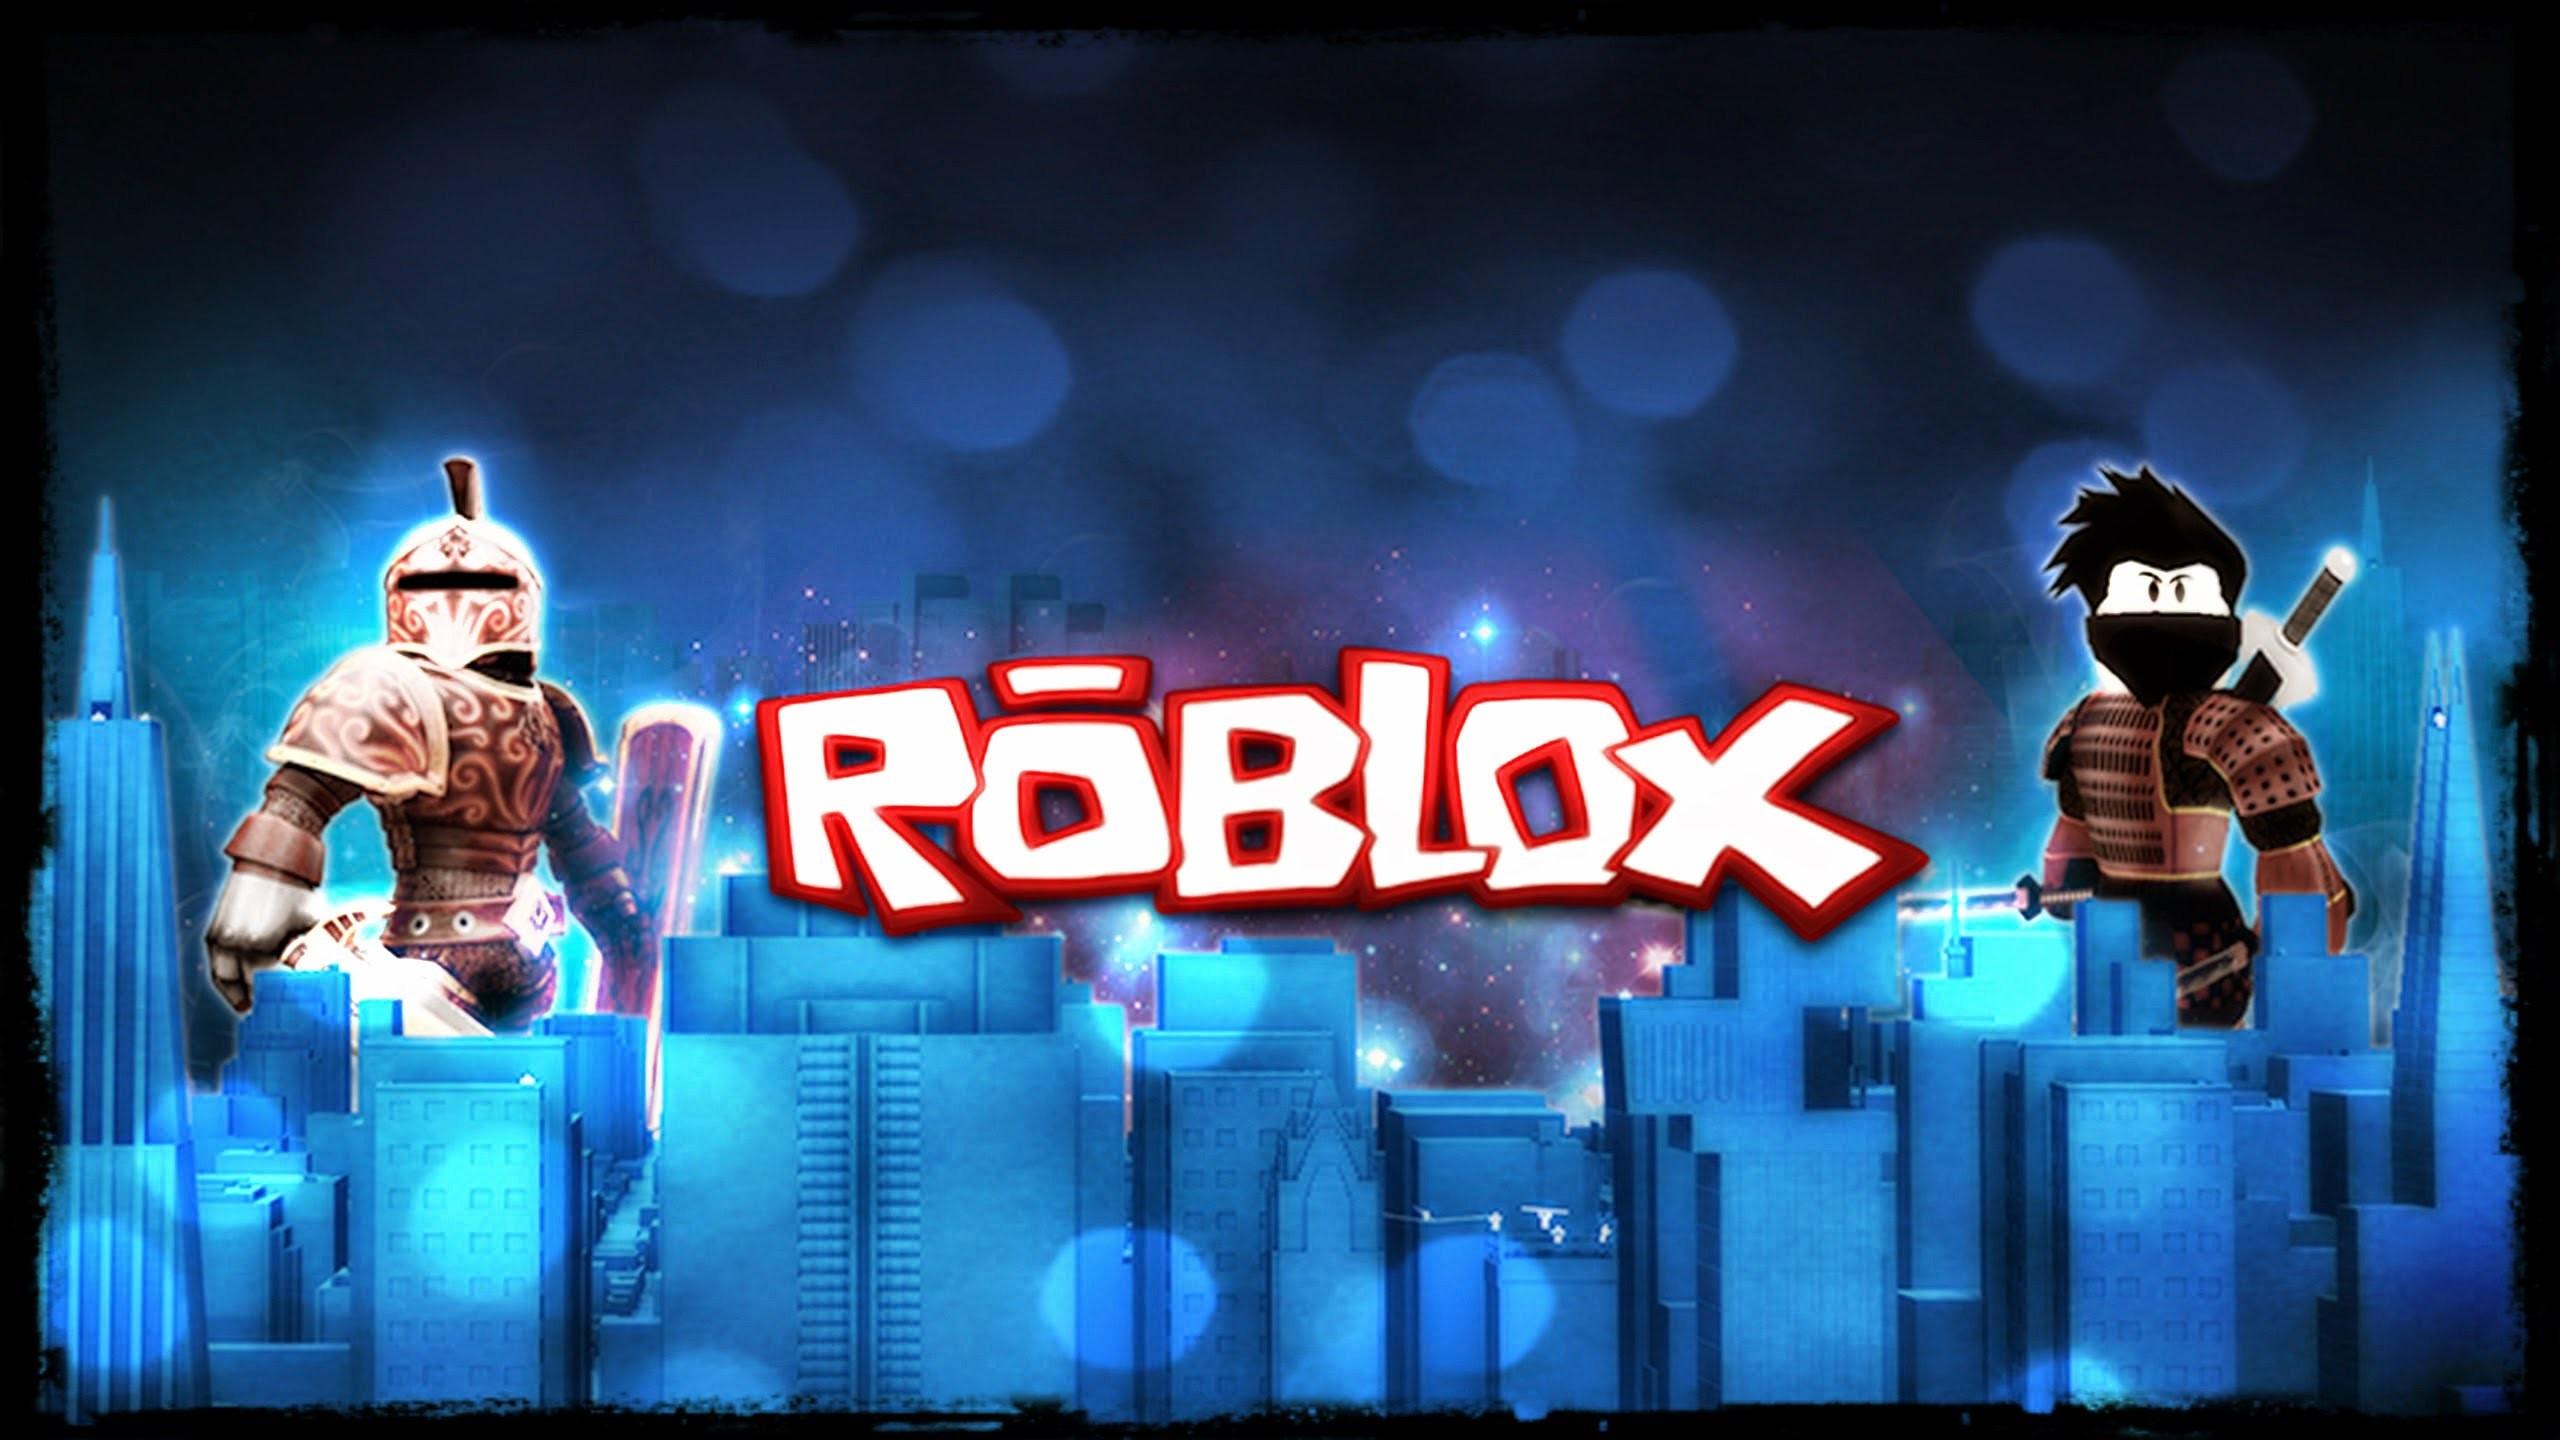 2560 x 1440 · jpeg - Roblox background 1 Download free beautiful HD backgrounds for desktop ...